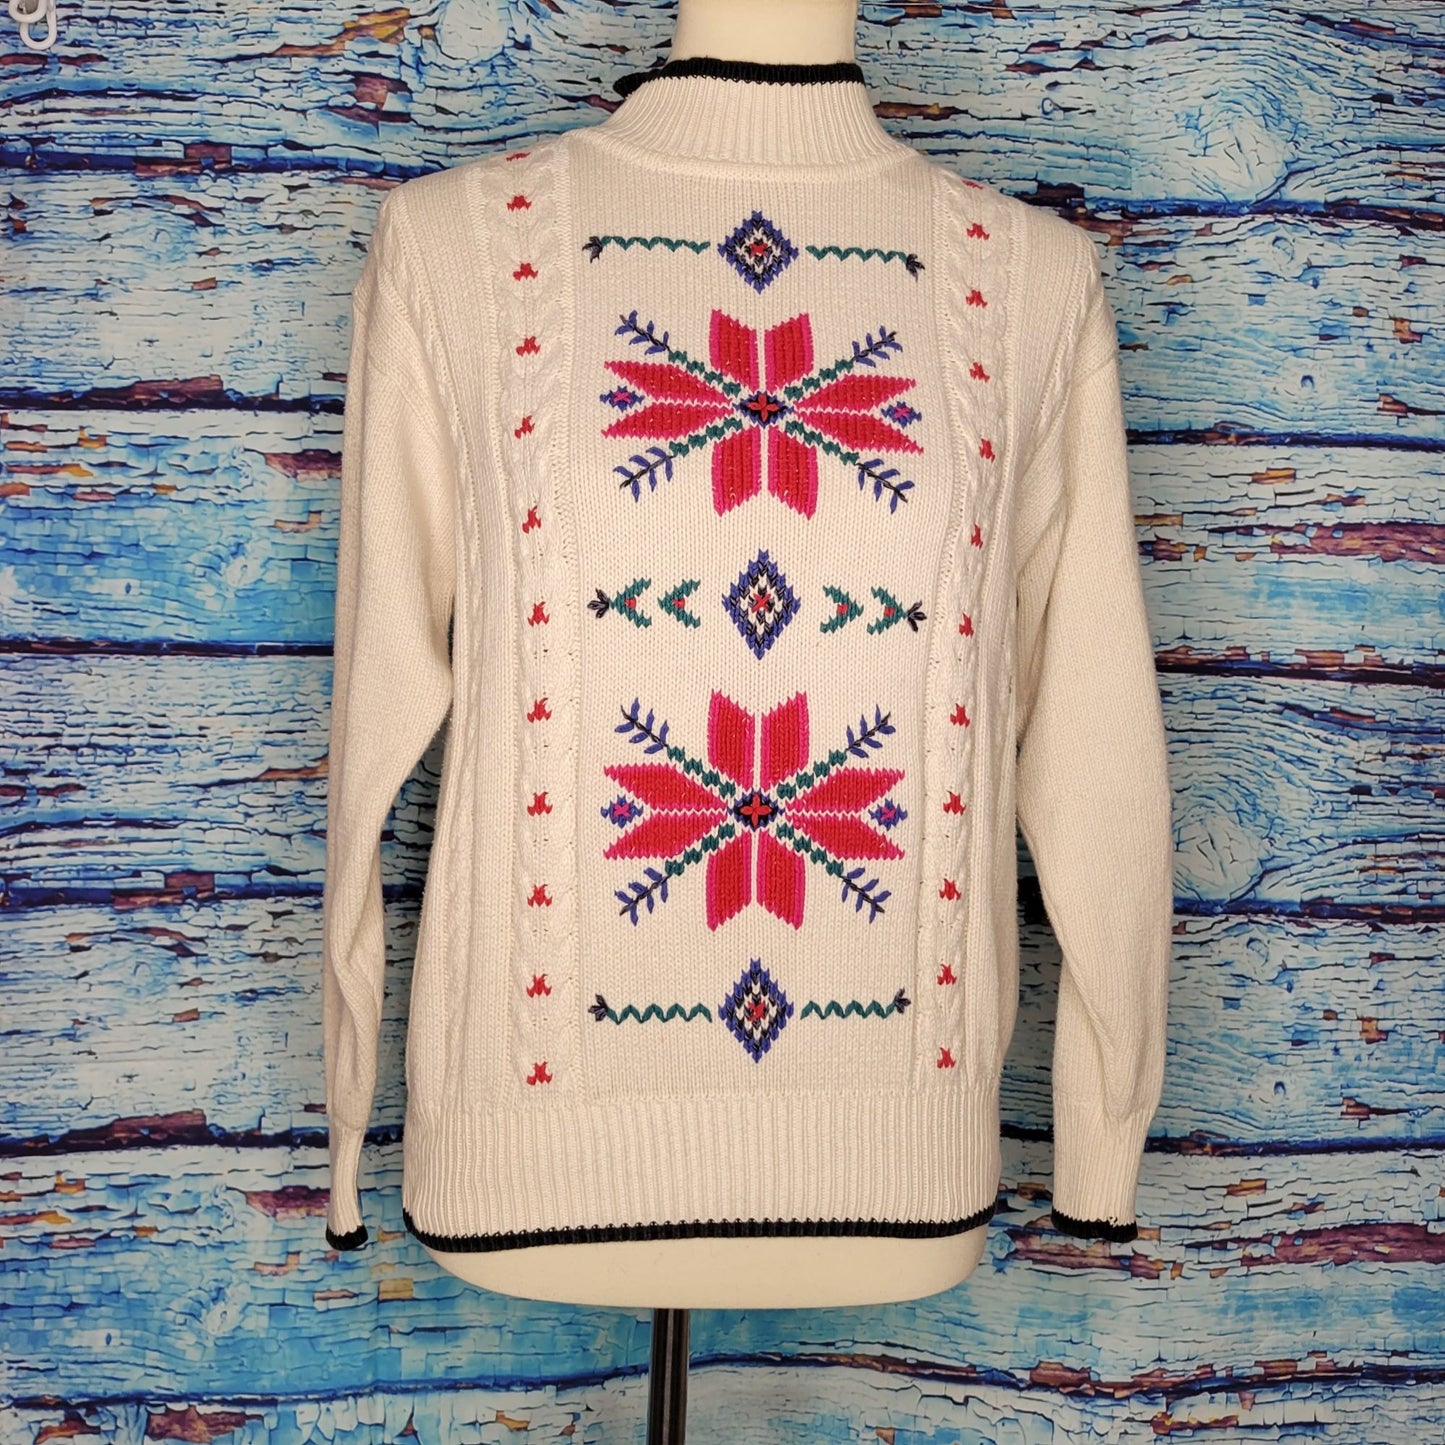 Vintage 80's 90's Handloomed & Embroidered Sweater by HKA Designs